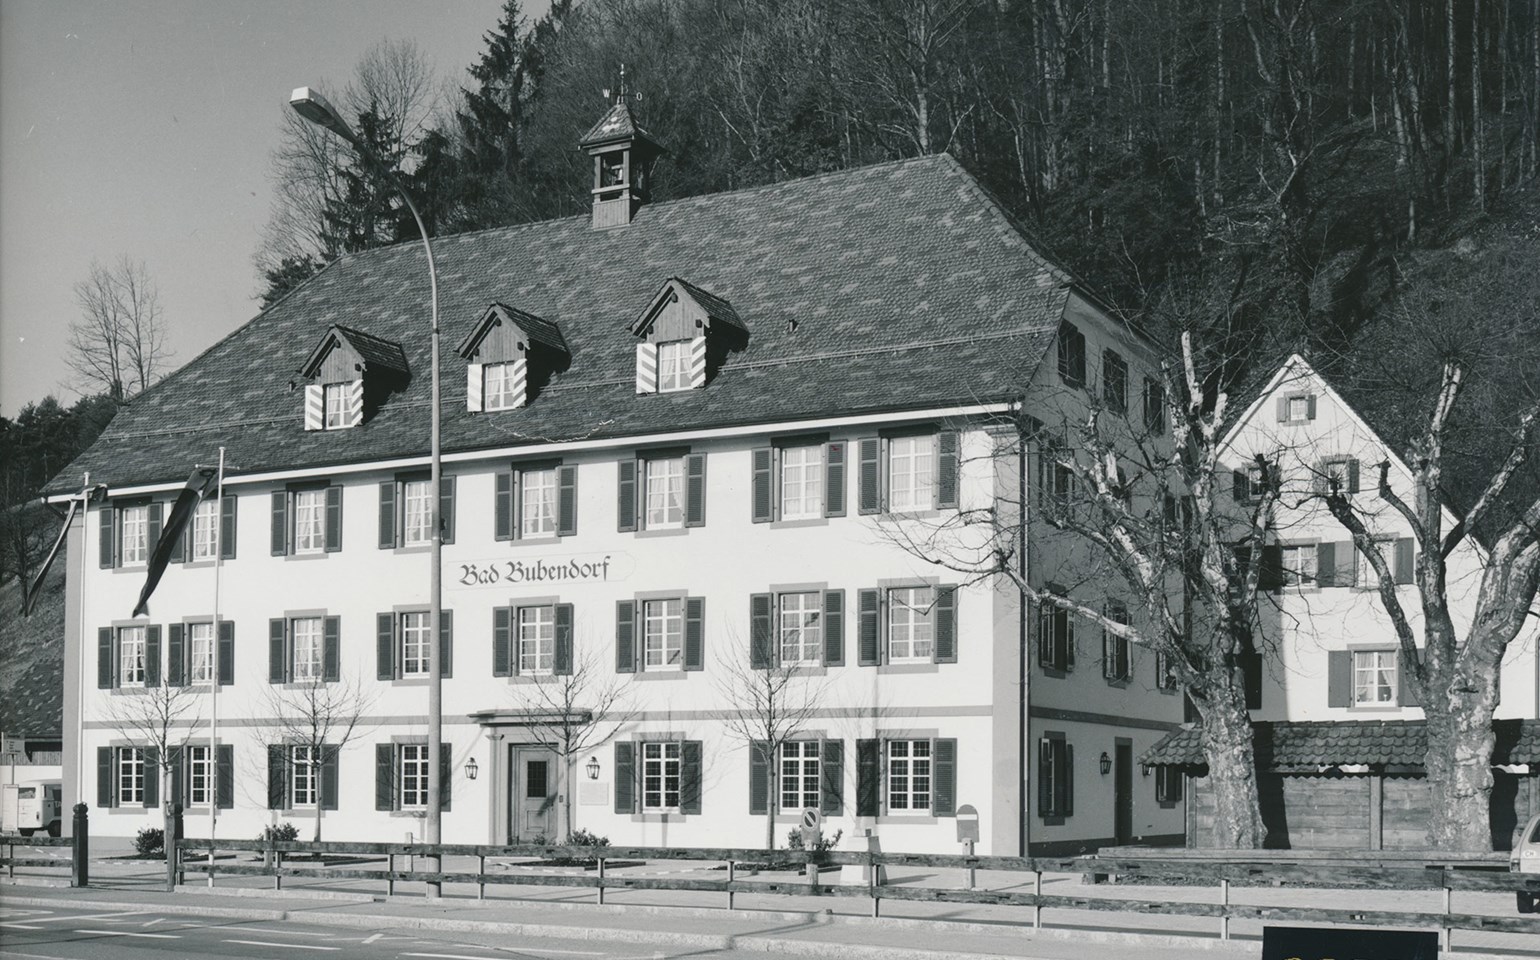 The Bad Bubendorf Hotel in earlier times